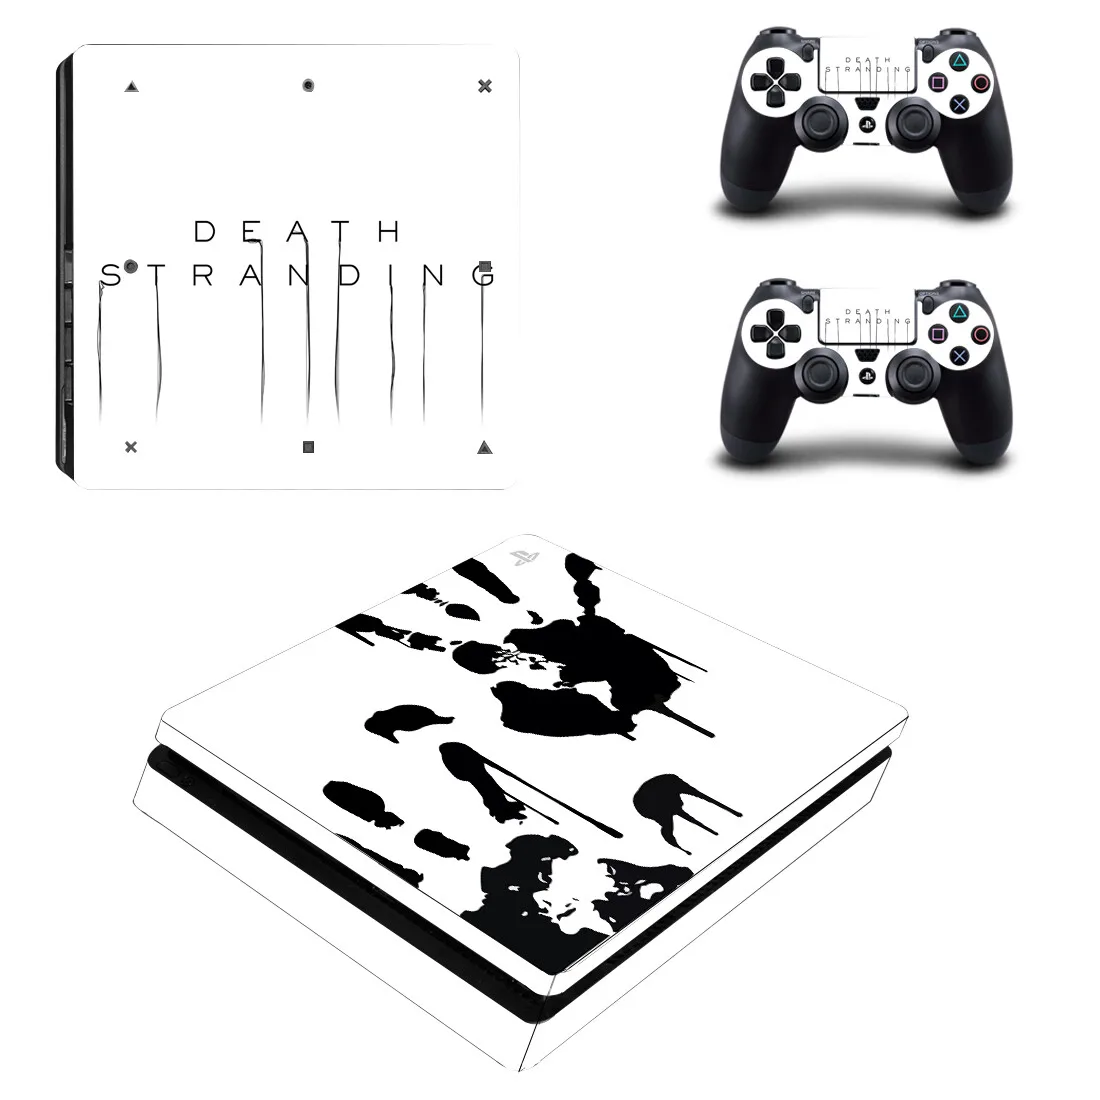 

Death Stranding PS4 Slim Skin Sticker For Sony PlayStation 4 Console and Controllers PS4 Slim Skins Sticker Decal Vinyl